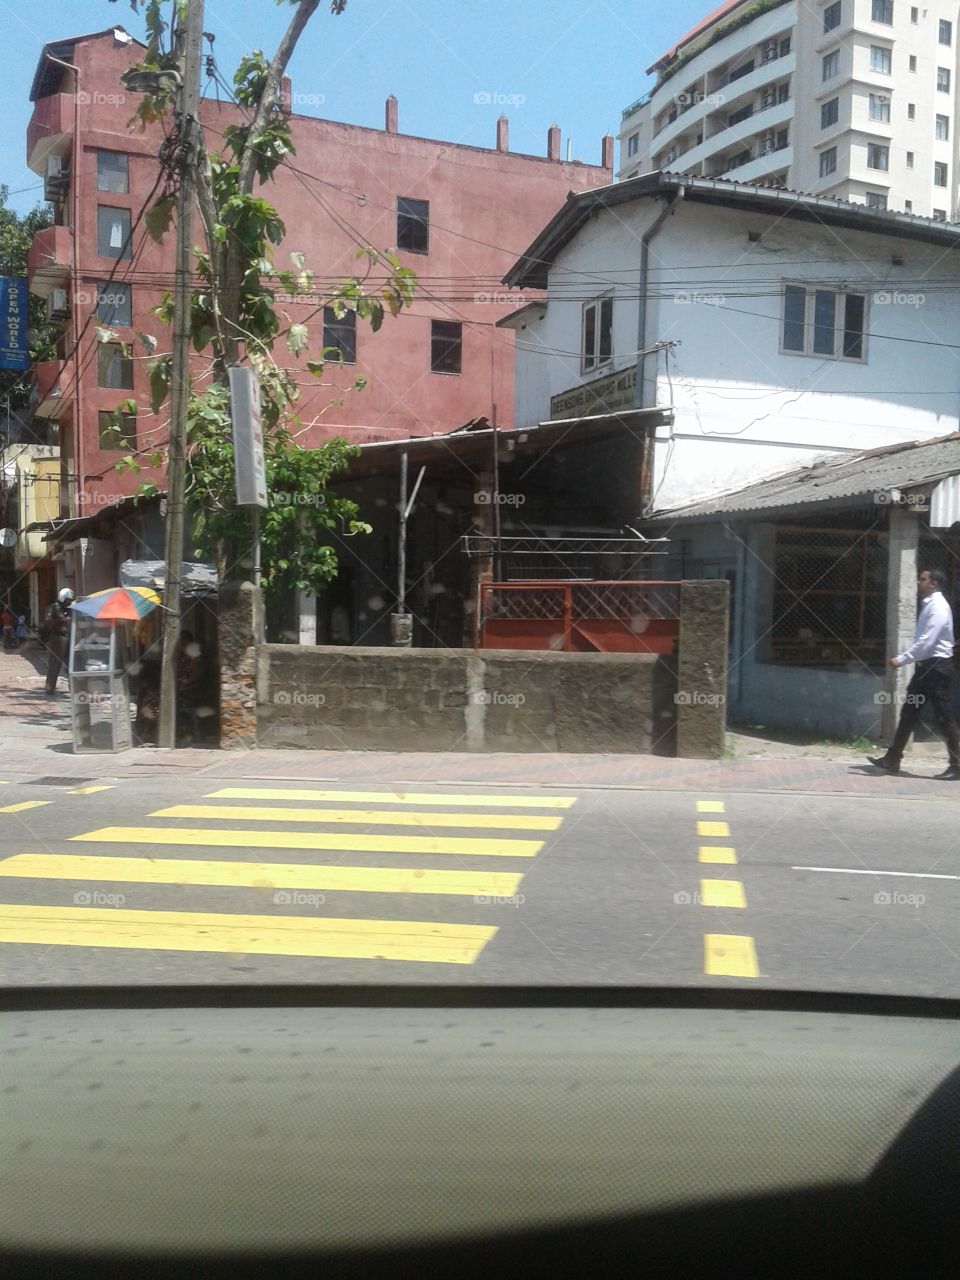 pedestrian crossing on the road.buildings are arounded